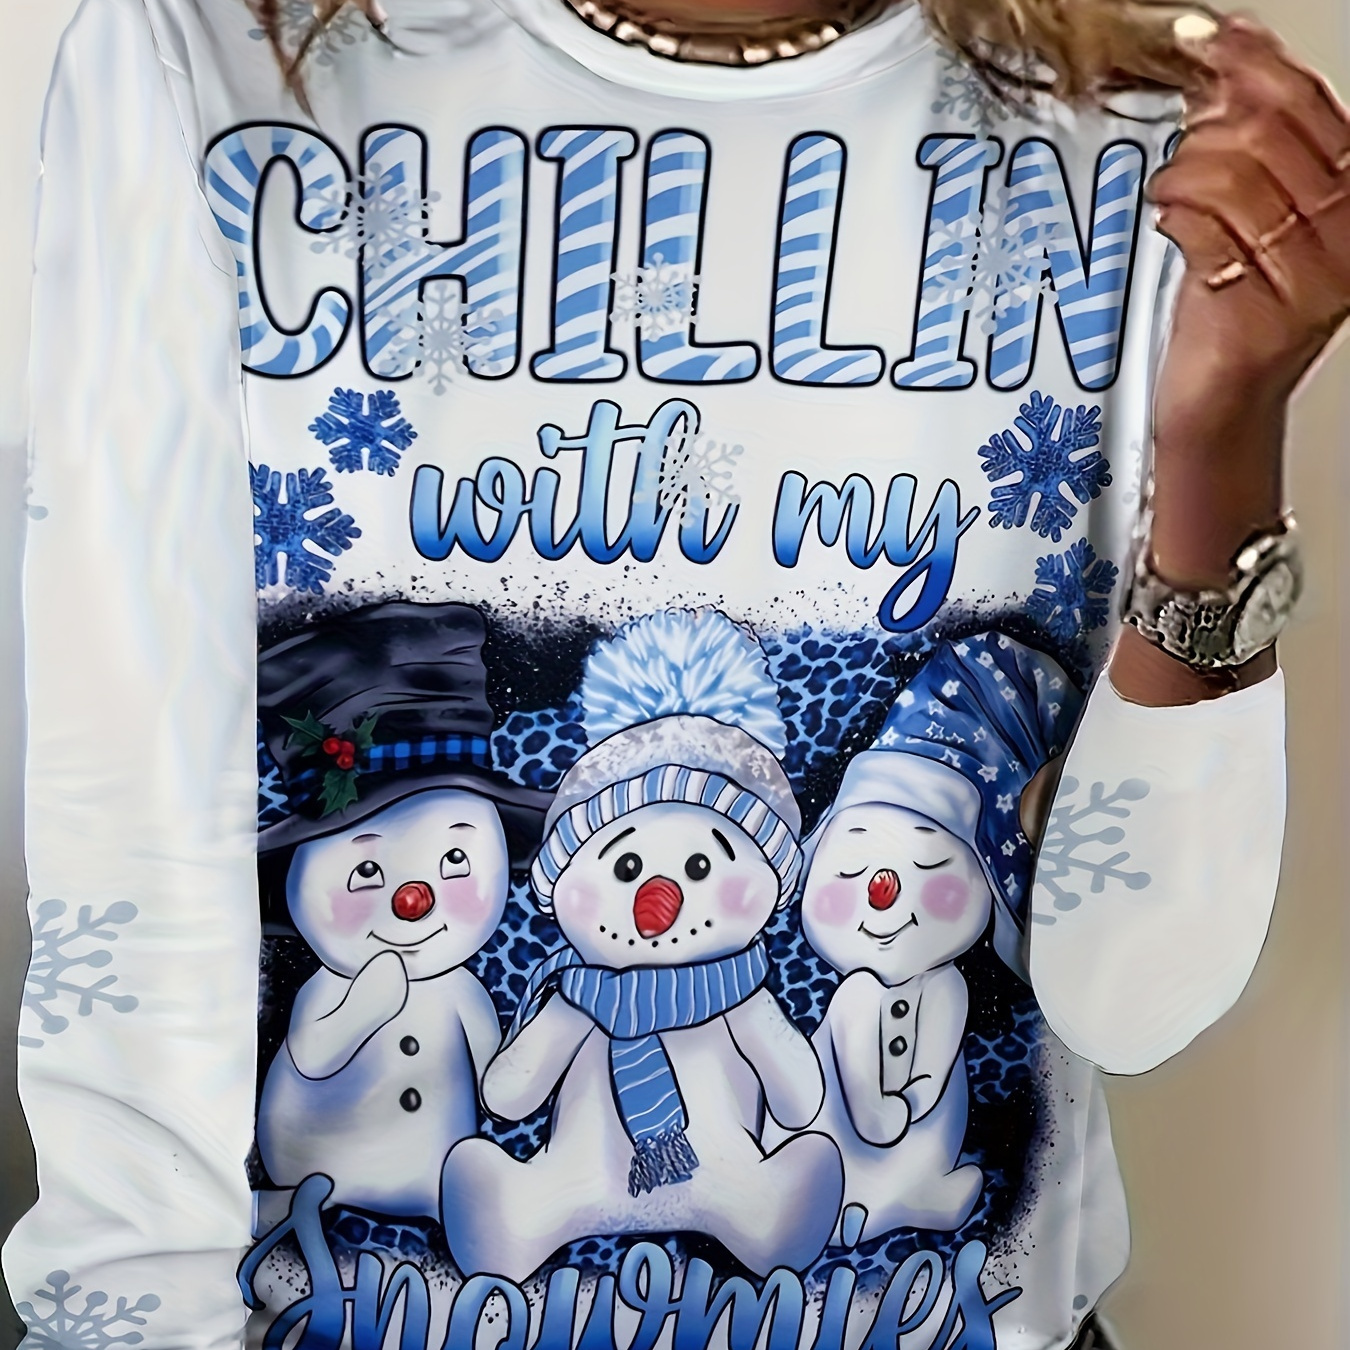 

Snowman & Letter Print Crew Neck T-shirt, Casual Long Sleeve Top For Spring & Fall, Women's Clothing